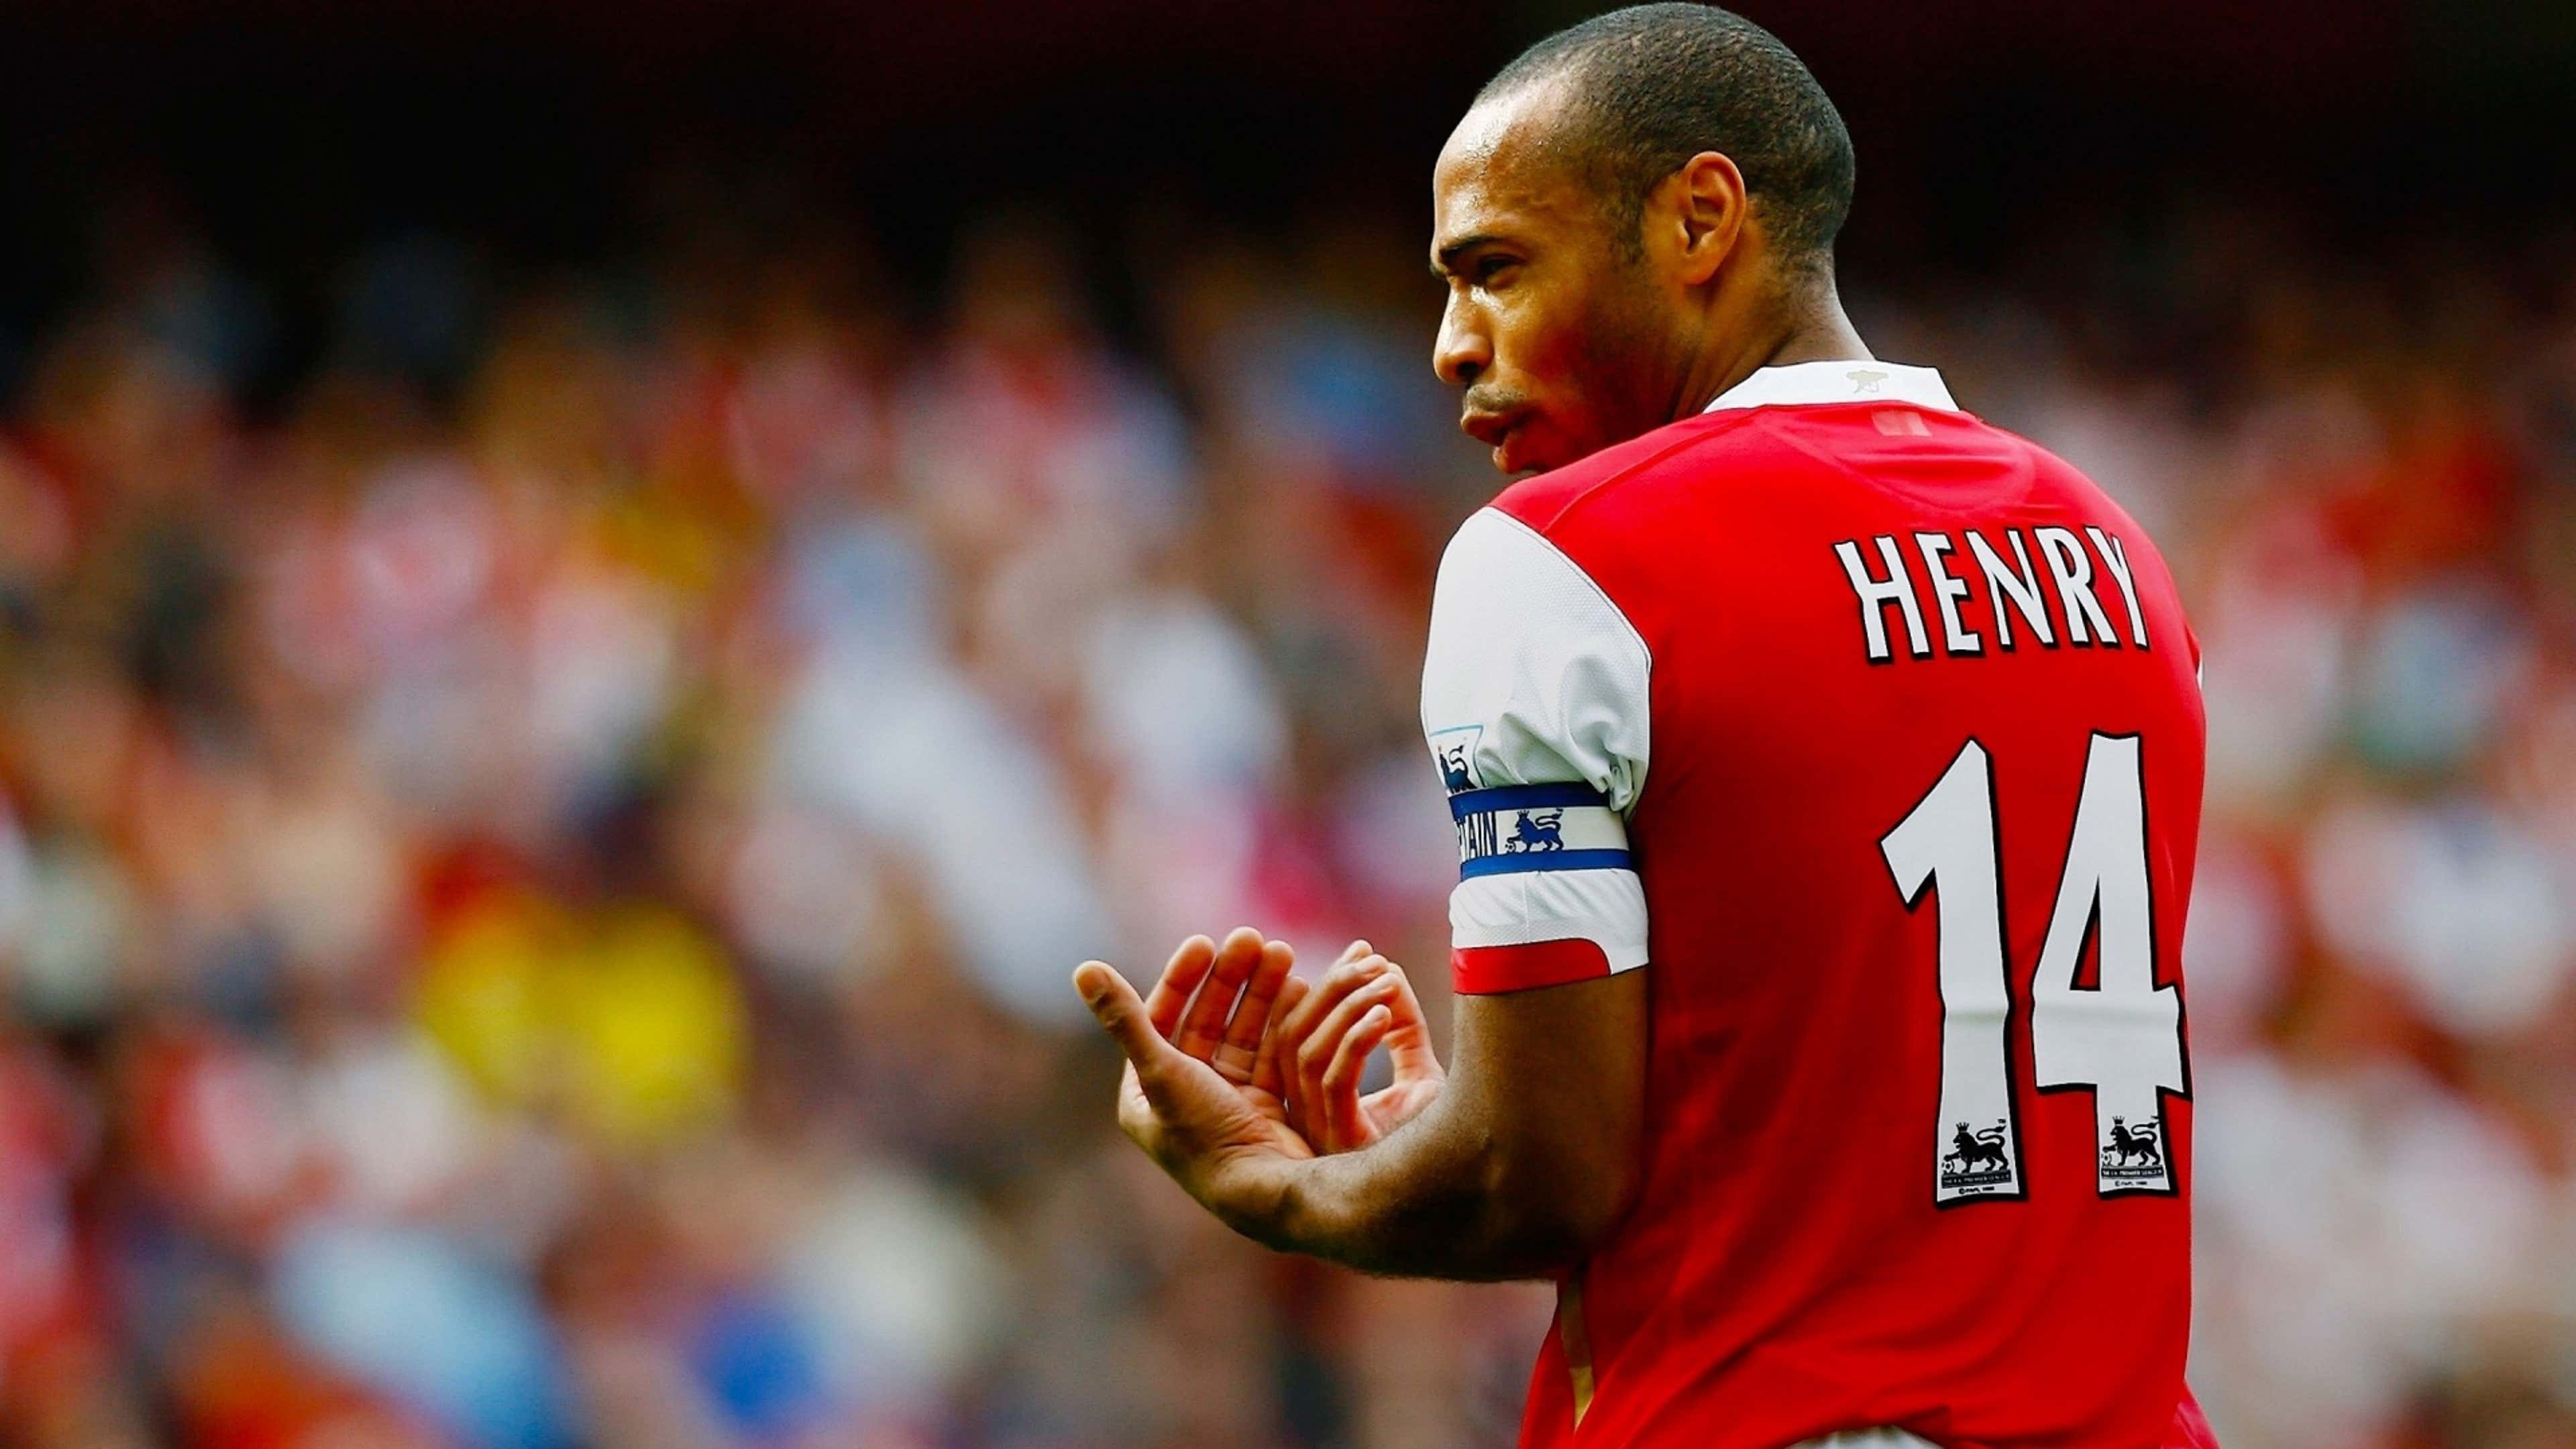 Thierry Henry 14